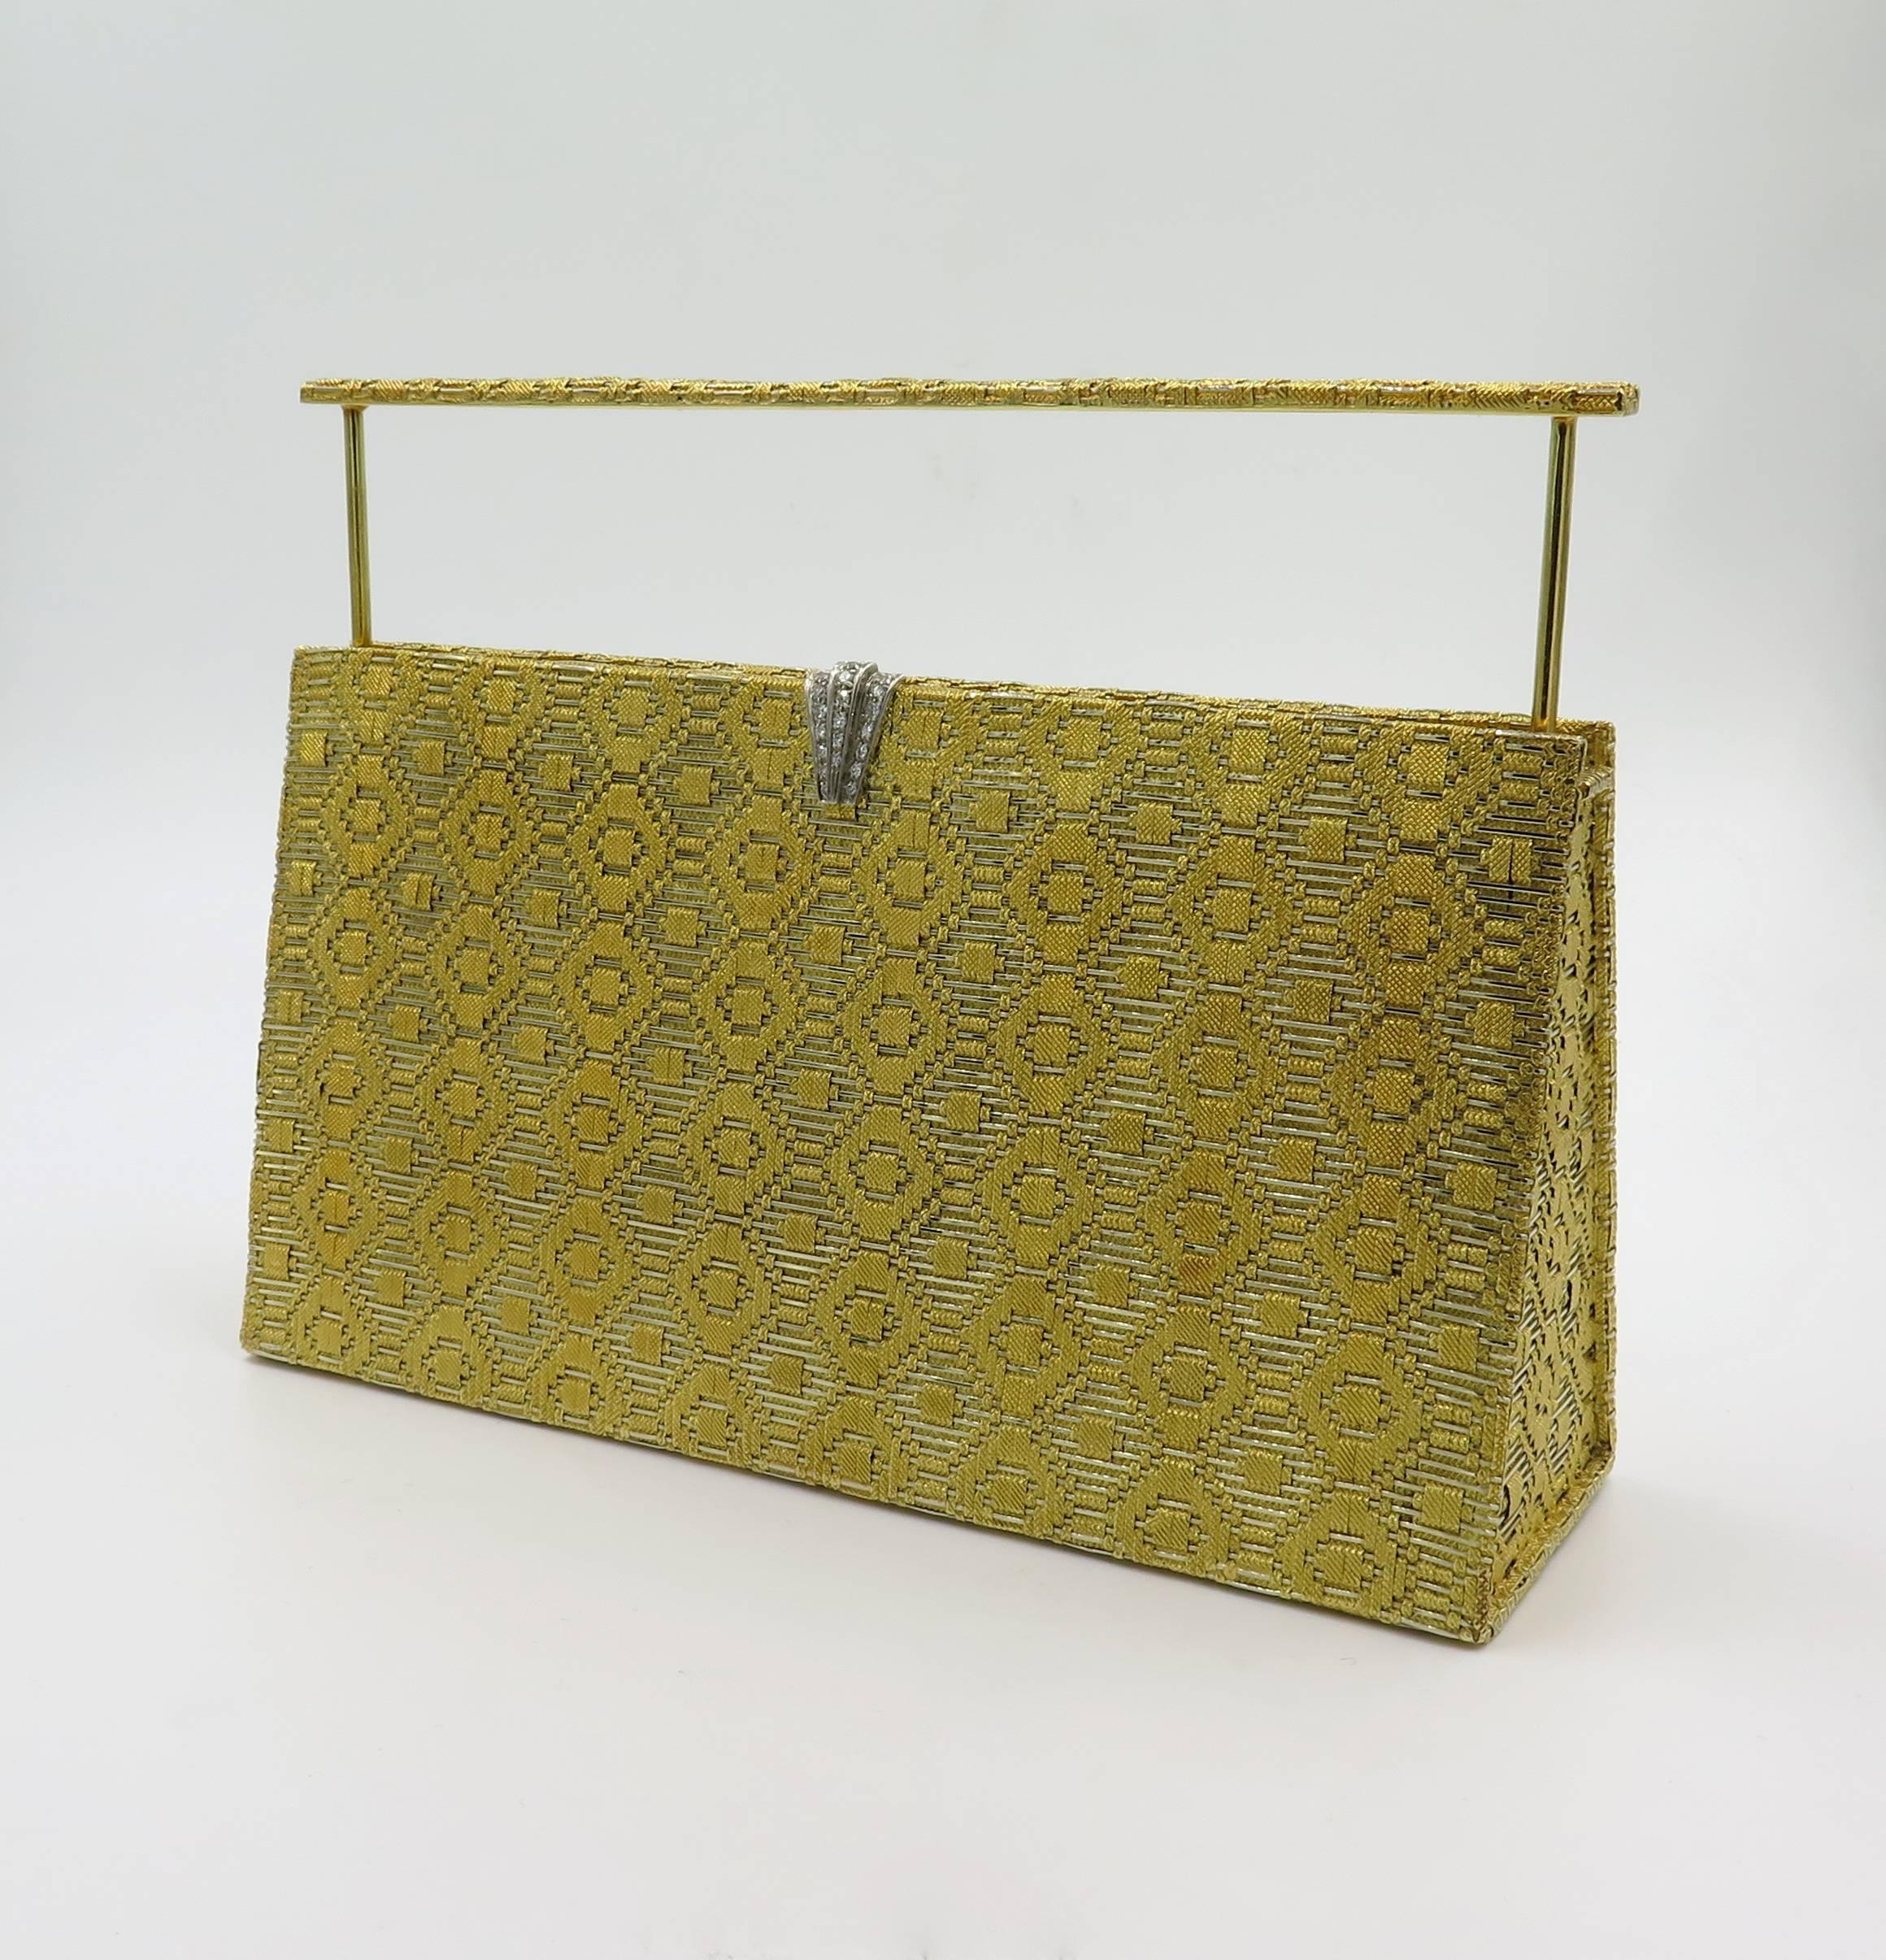 An 18 karat yellow gold, platinum and diamond minaudière. French. Circa 1950. the rectangular clutch of polished and woven gold design, with a pave set diamond closure, opening to reveal a mirror and comb, with hidden handle. With French maker’s